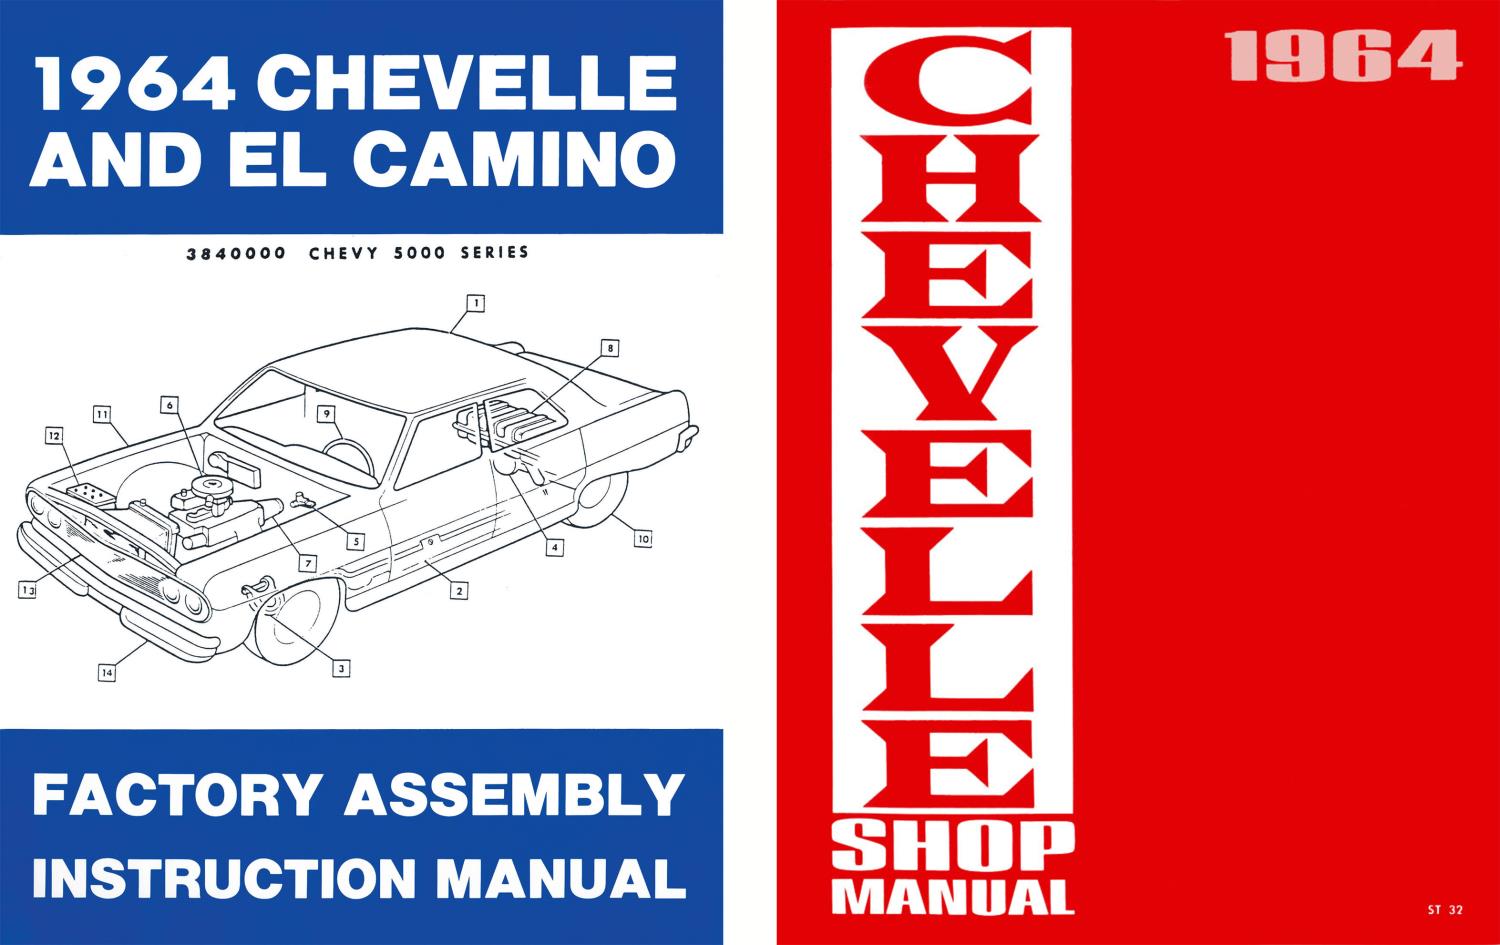 Shop Manual Set for 1964 Chevrolet Chevelle and El Camino